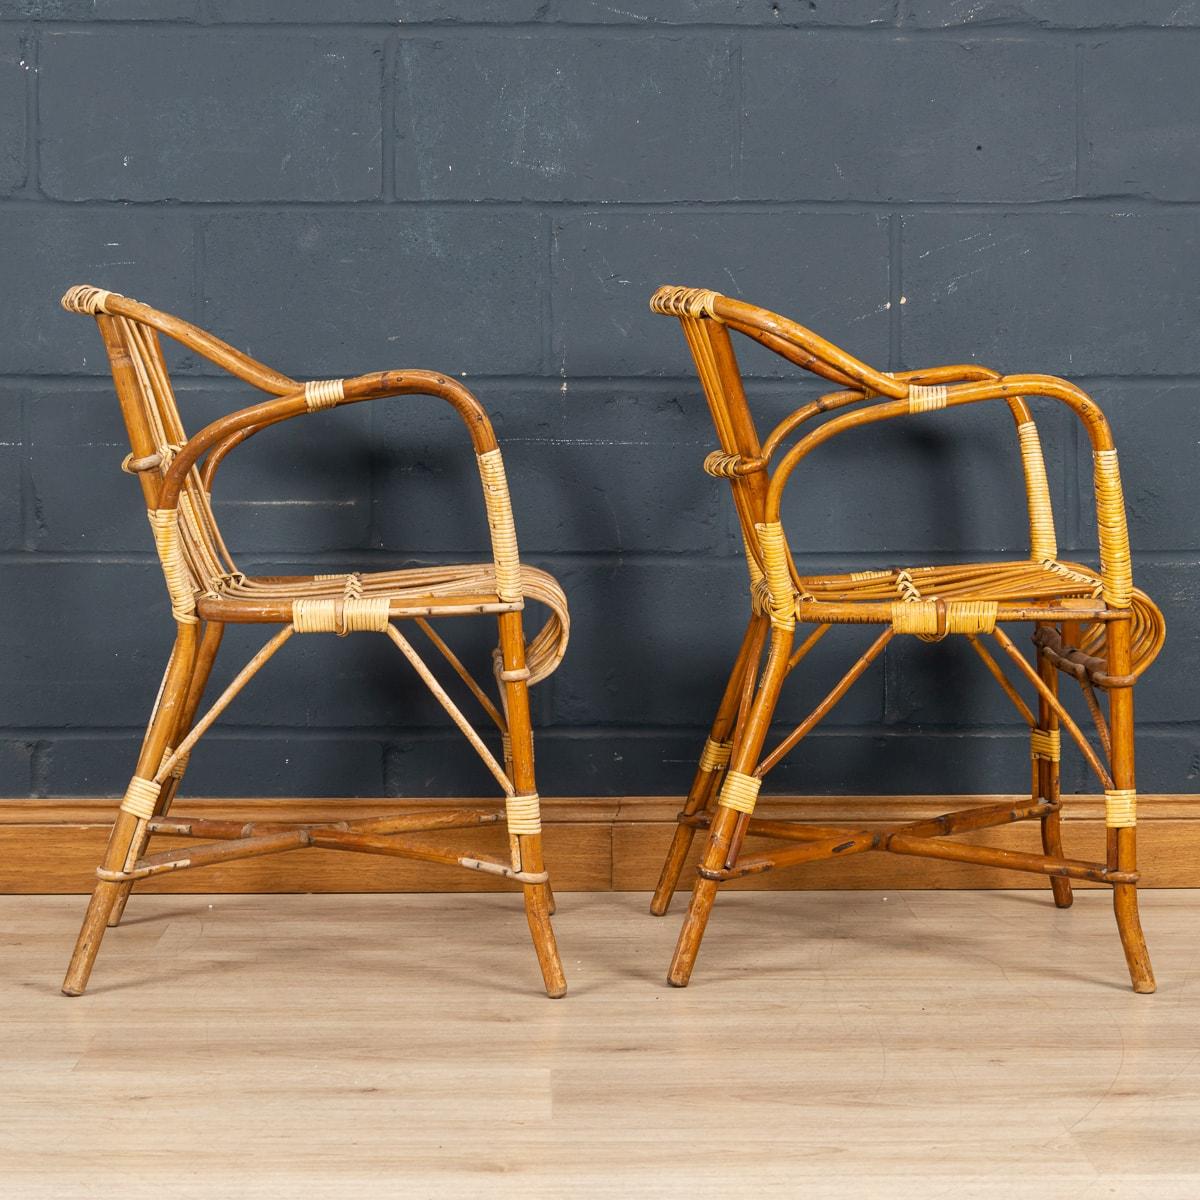 20th Century French Wicker Chairs By Drucker 3